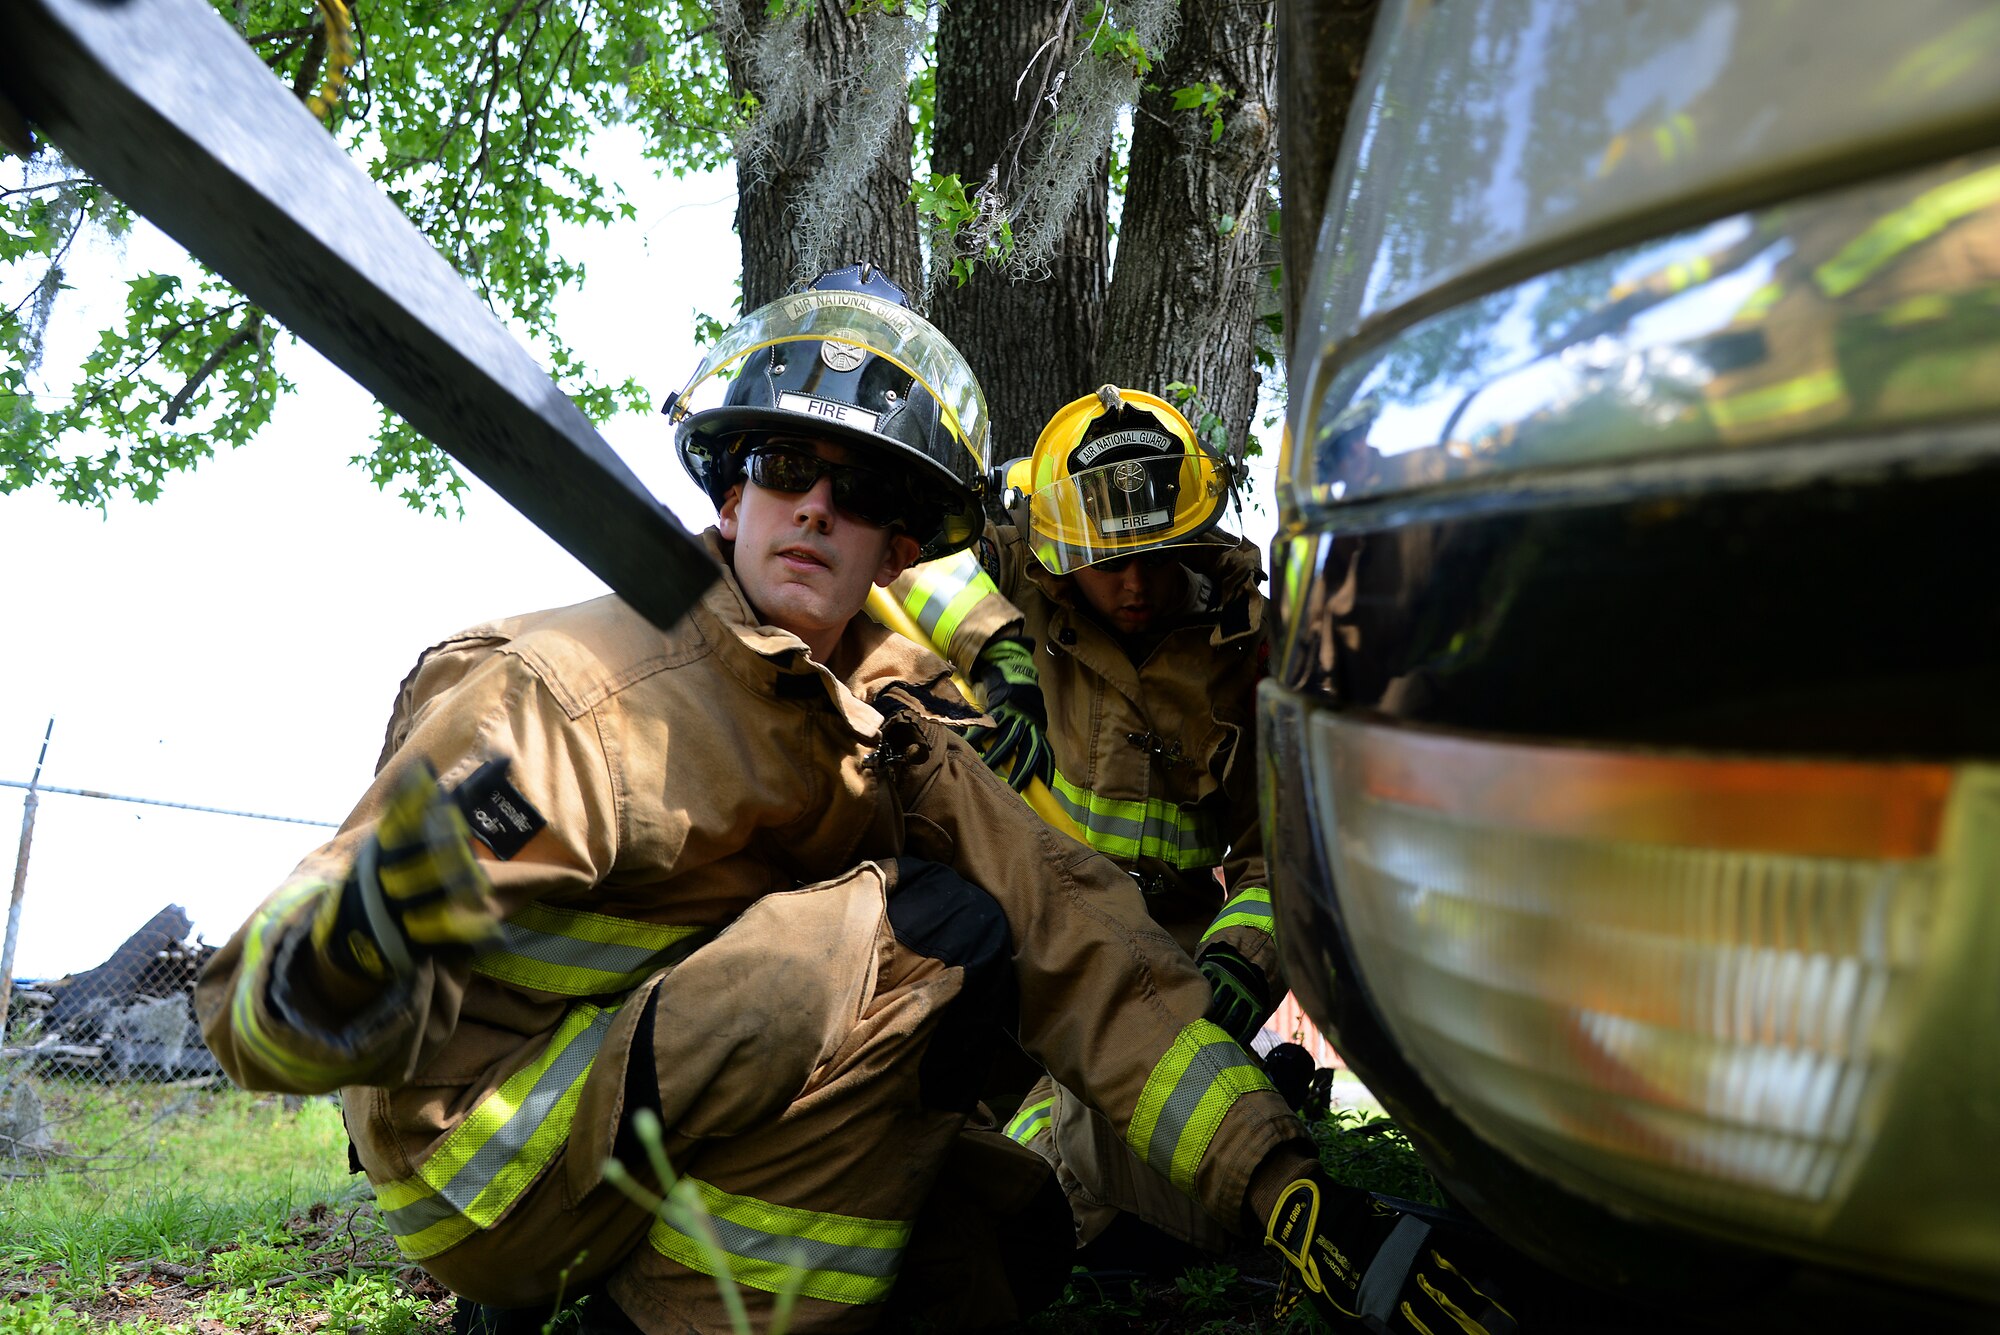 A picture of Airman 1st Class Scott Bramhall of the 177th Fighter Wing Fire Department, New Jersey Air National Guard, utilizing wedge cribbing to stabilize a vehicle.